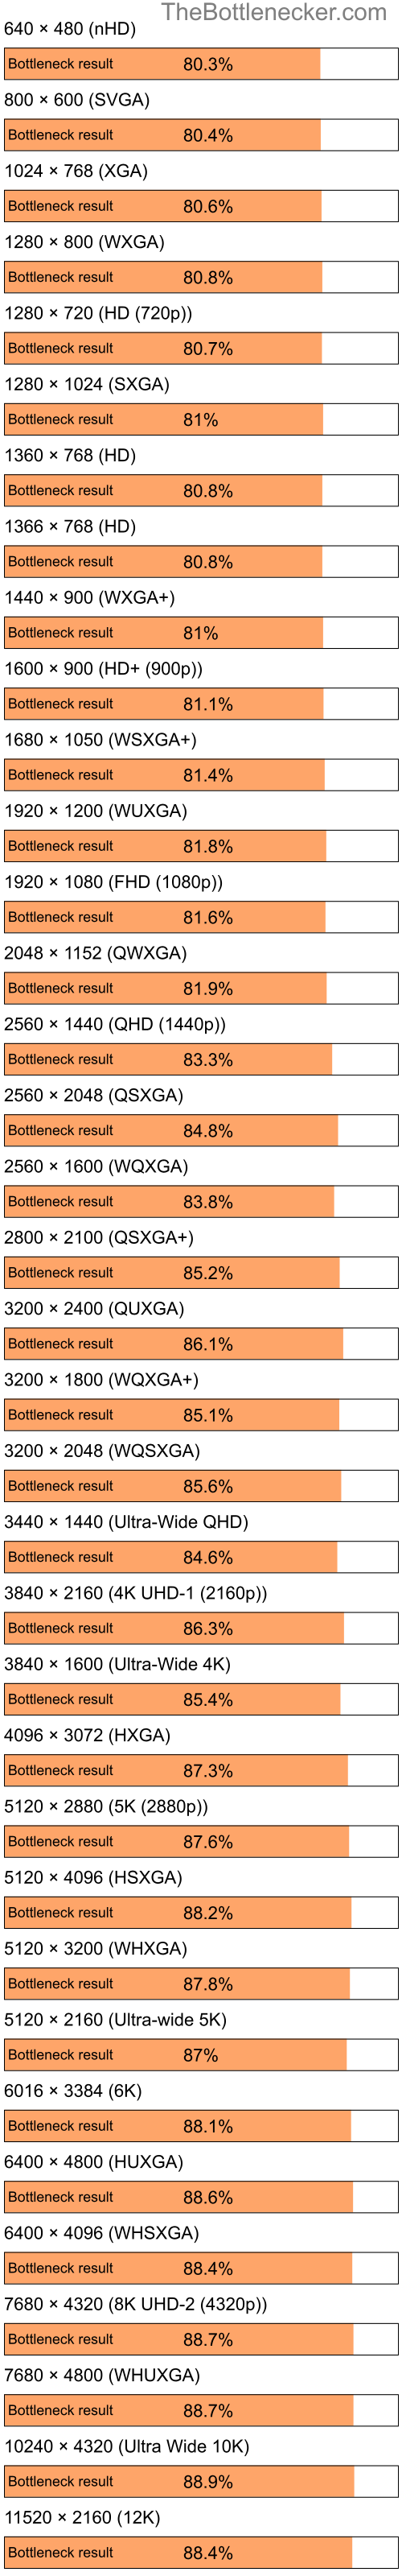 Bottleneck results by resolution for Intel Celeron M and NVIDIA GeForce 6200 in Graphic Card Intense Tasks